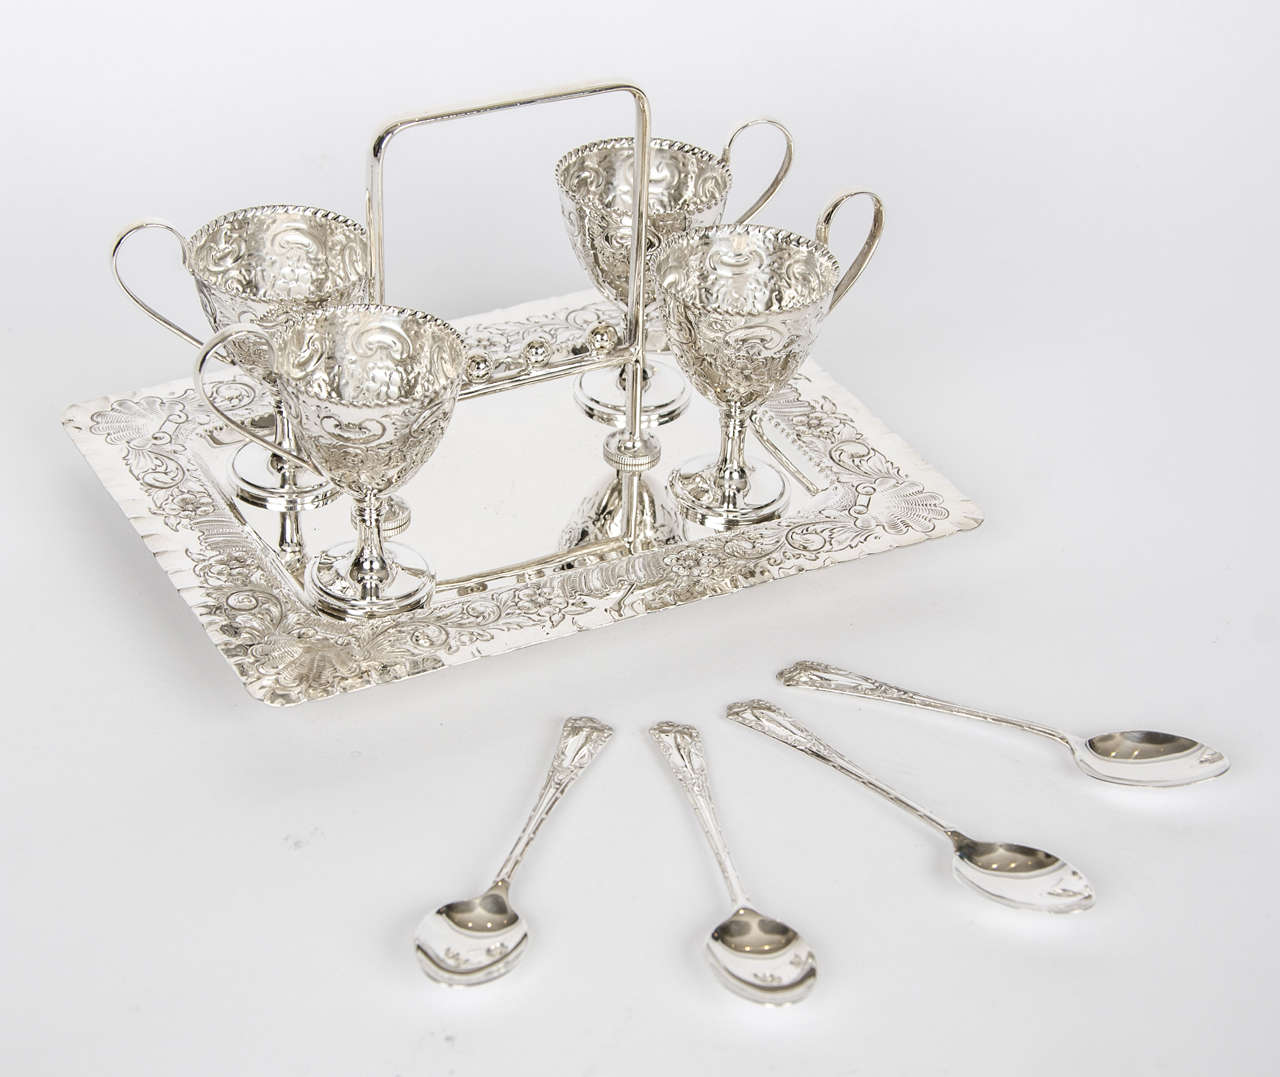 Silver plate egg cruet, with intricate shell pattern on tray. Set comprises of four egg cups and four matching spoons. Circa 1875.

Please enquire about shipping costs due to size and nature of the item.